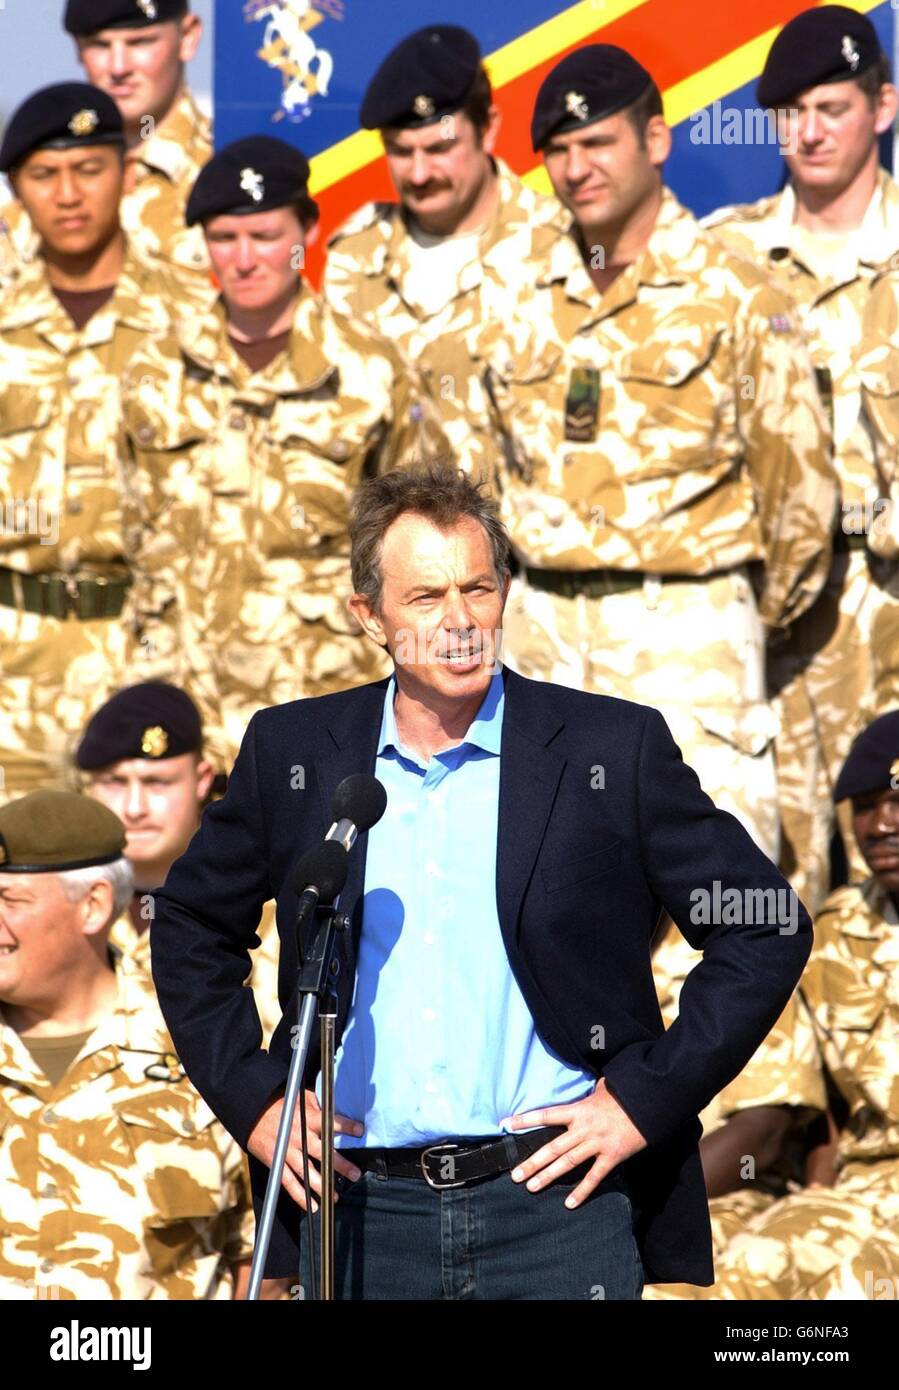 British Prime Minister Tony Blair addresses troops as he arrives in Basra for a surprise visit to British soldiers in Iraq. Mr Blair told the troops: It's a great honour for me to be here today. The first thing I want to say is a huge thank you for the work you're doing here. 17/10/04: The Government faced opposition demands for a Commons statement on plans to deploy British troops in support of the Americans around Baghdad. Blair was warned that British forces in Iraq could face a dangerous backlash if US attempts to seize the insurgent stronghold of Fallujah ended in mass bloodshed. Stock Photo